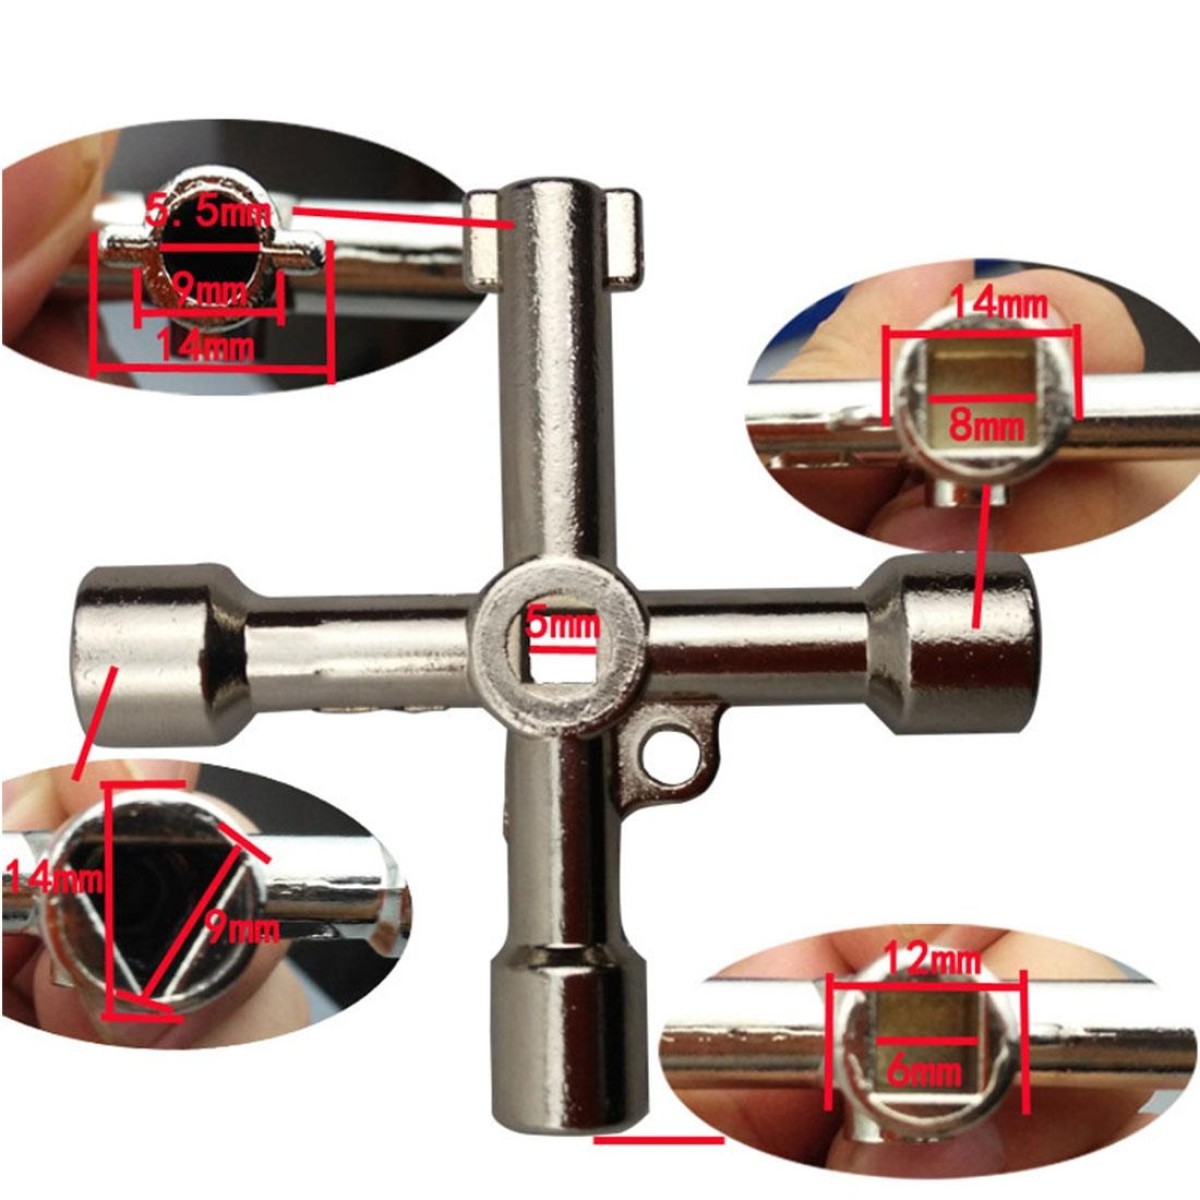 4 in 1 Multifunctional Cross Key Wrench with Circle Triangle Square Shape